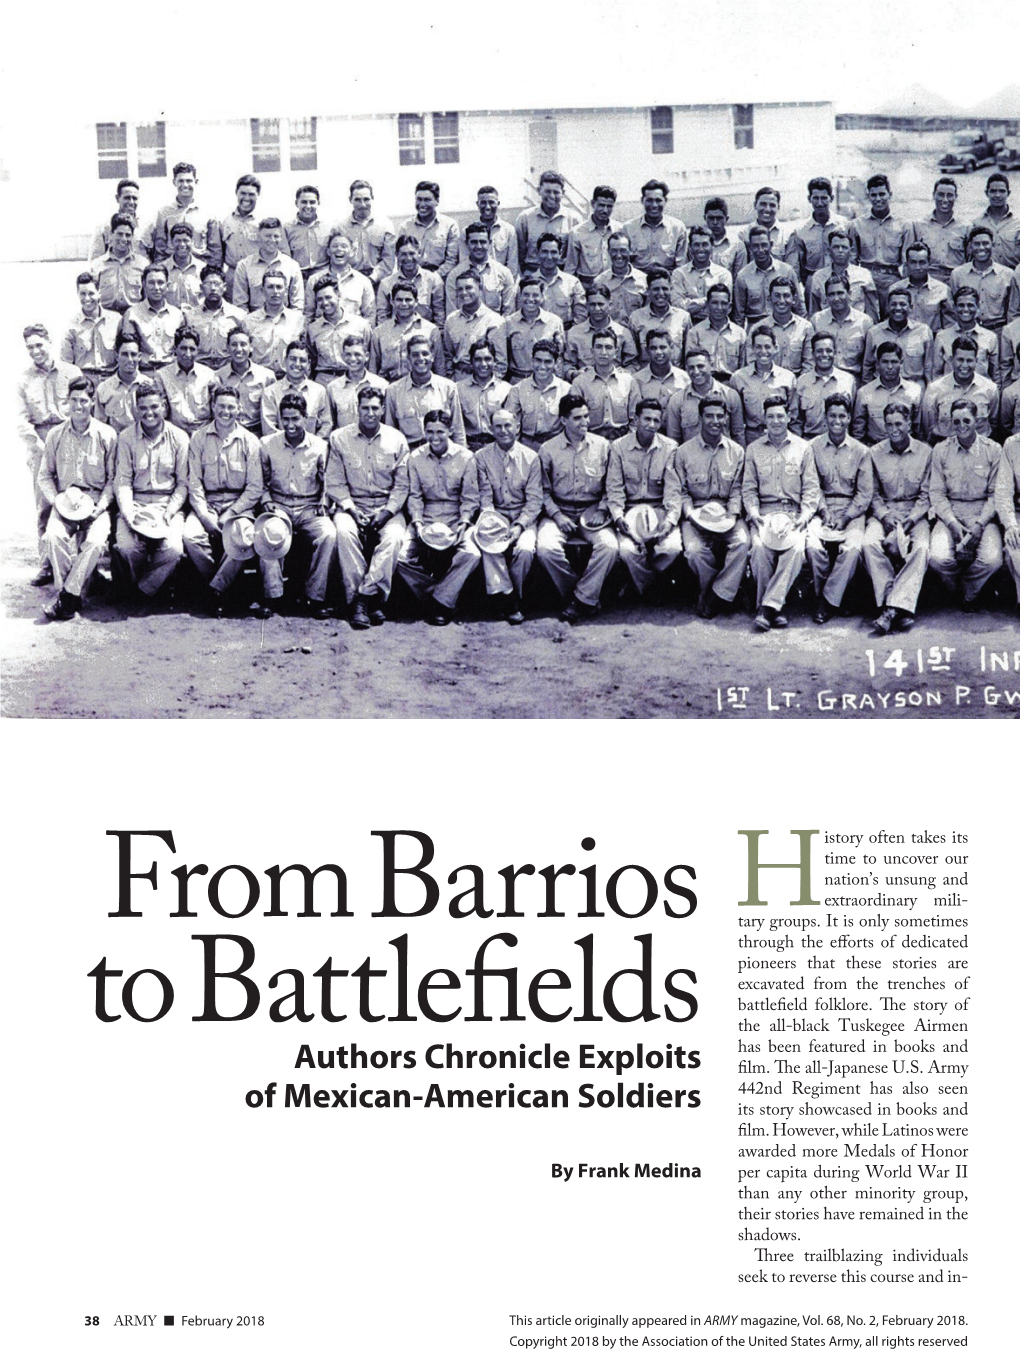 Authors Chronicle Exploits of Mexican-American Soldiers